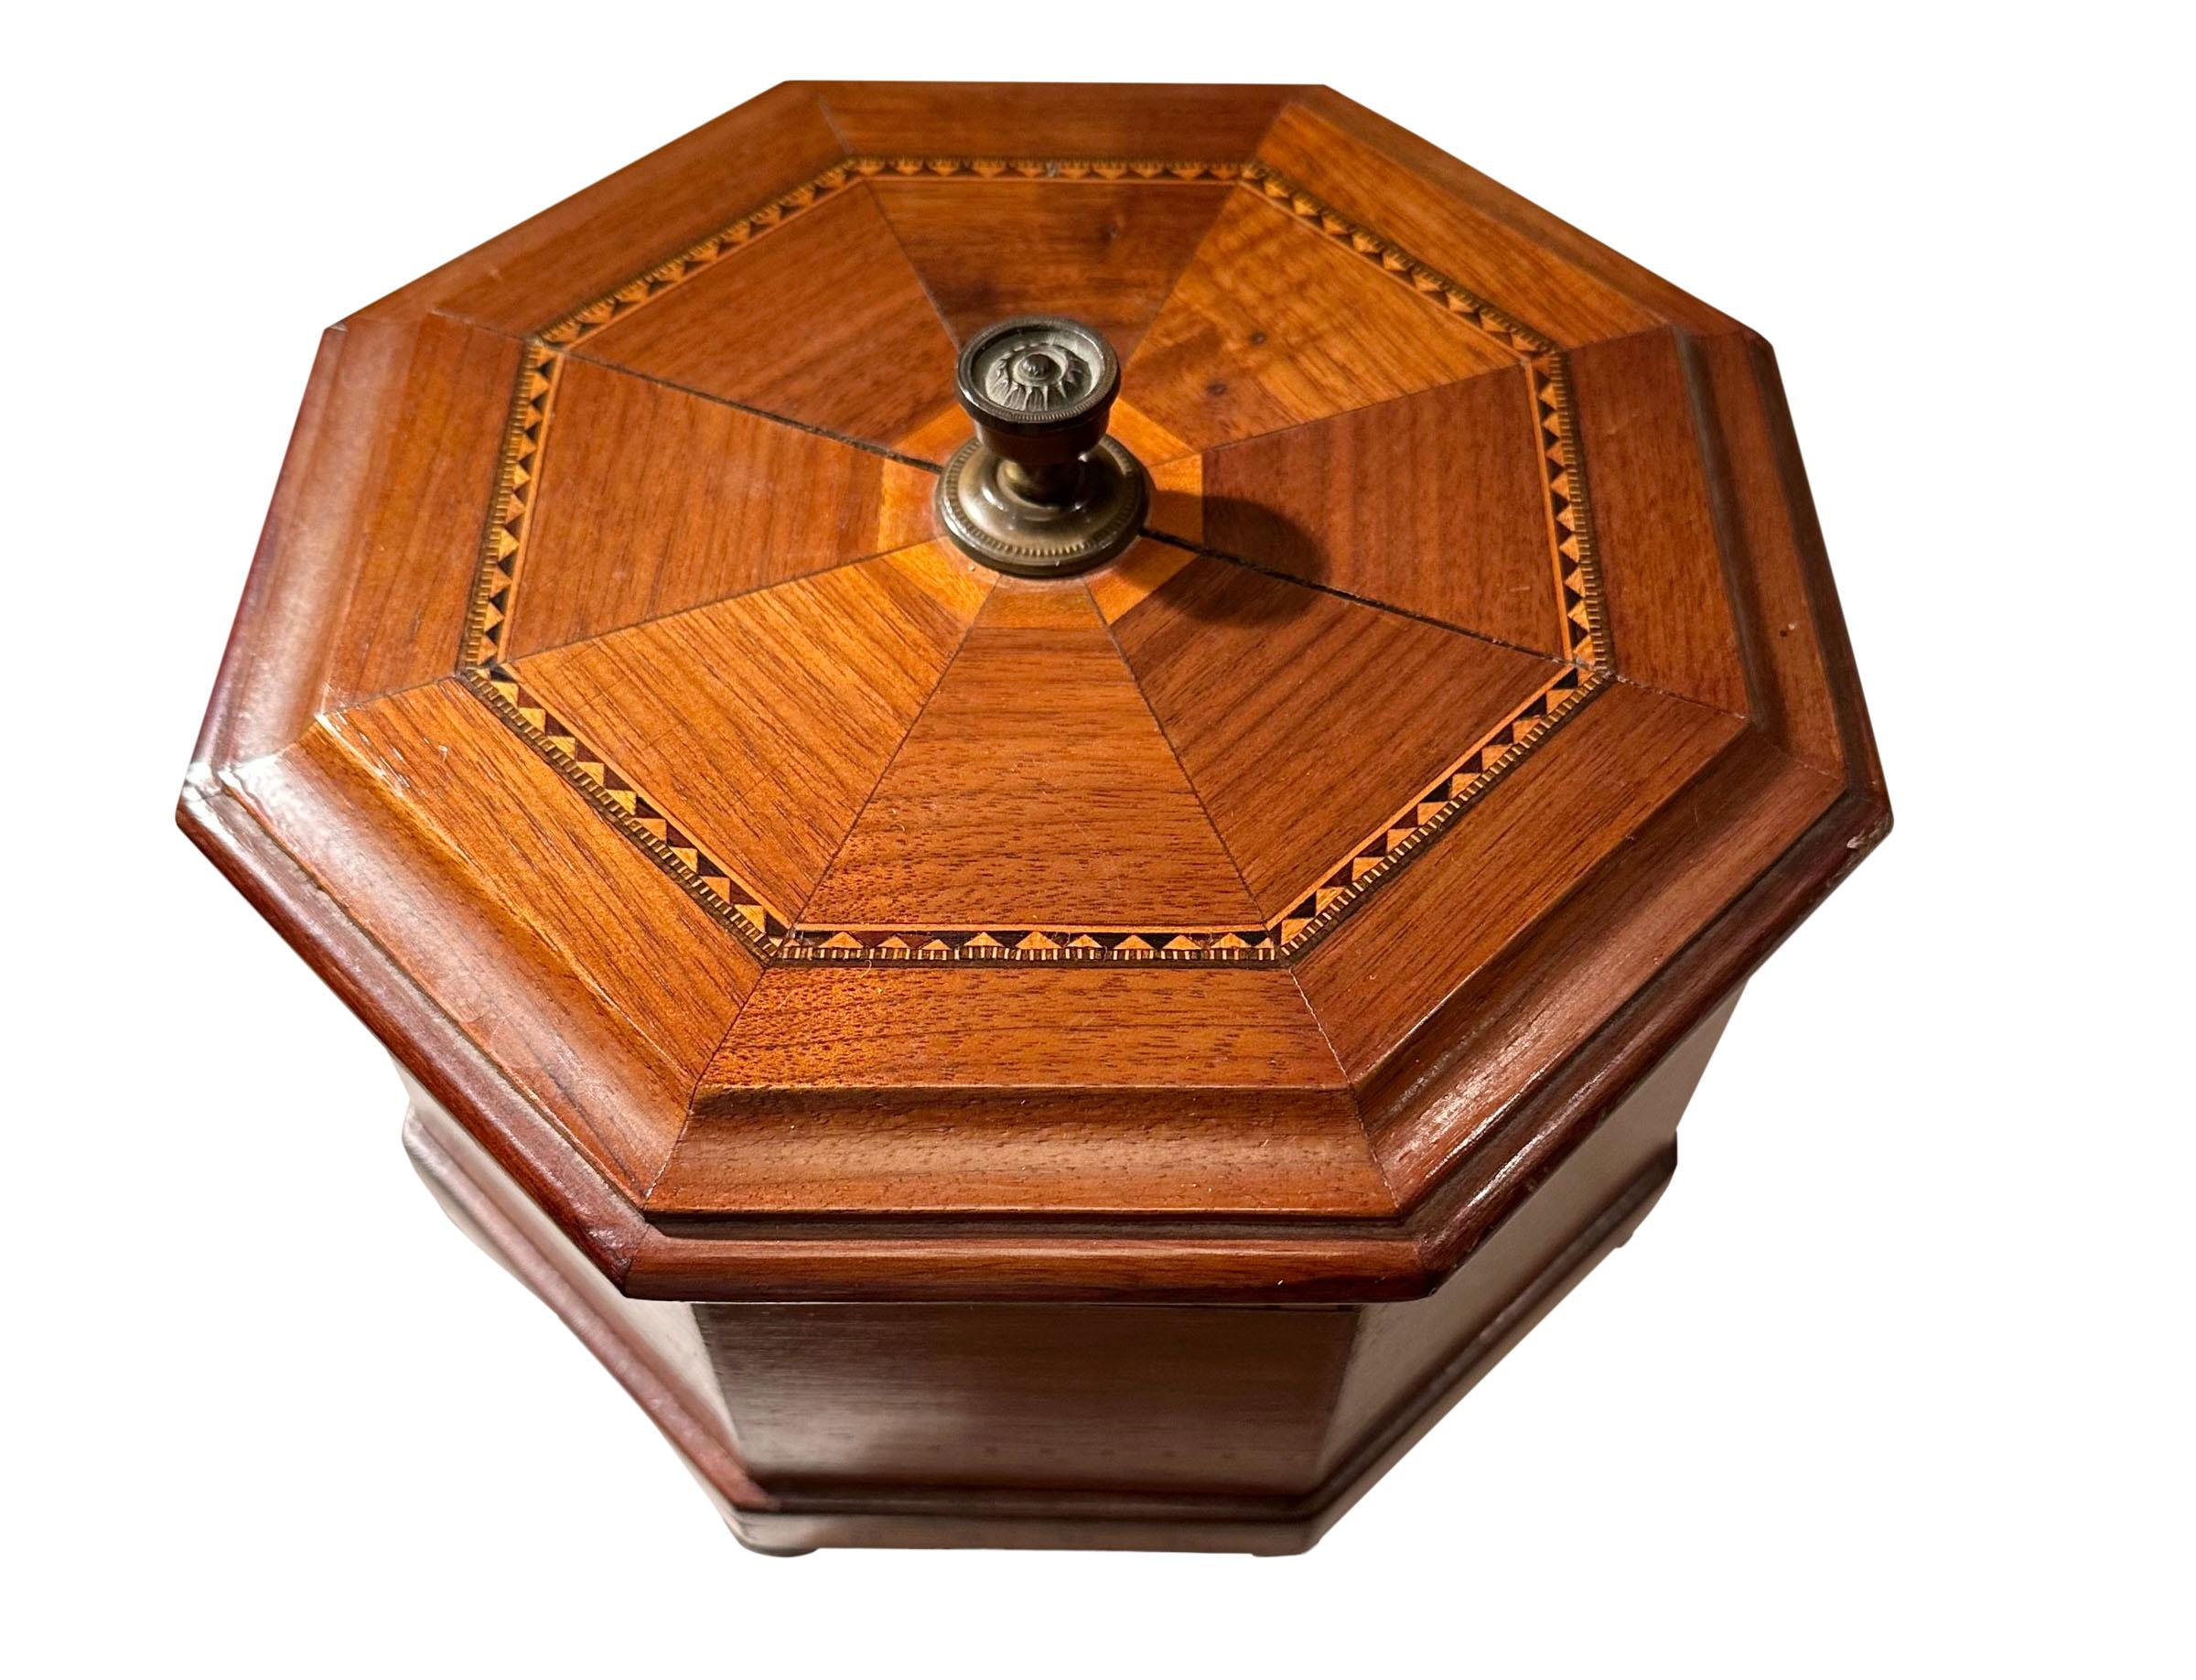 A lovely octagonal shape wooden box. The top with a striking inlay and a brass finial. Bun feet. The interior is three inches deep. English, turn of the century.